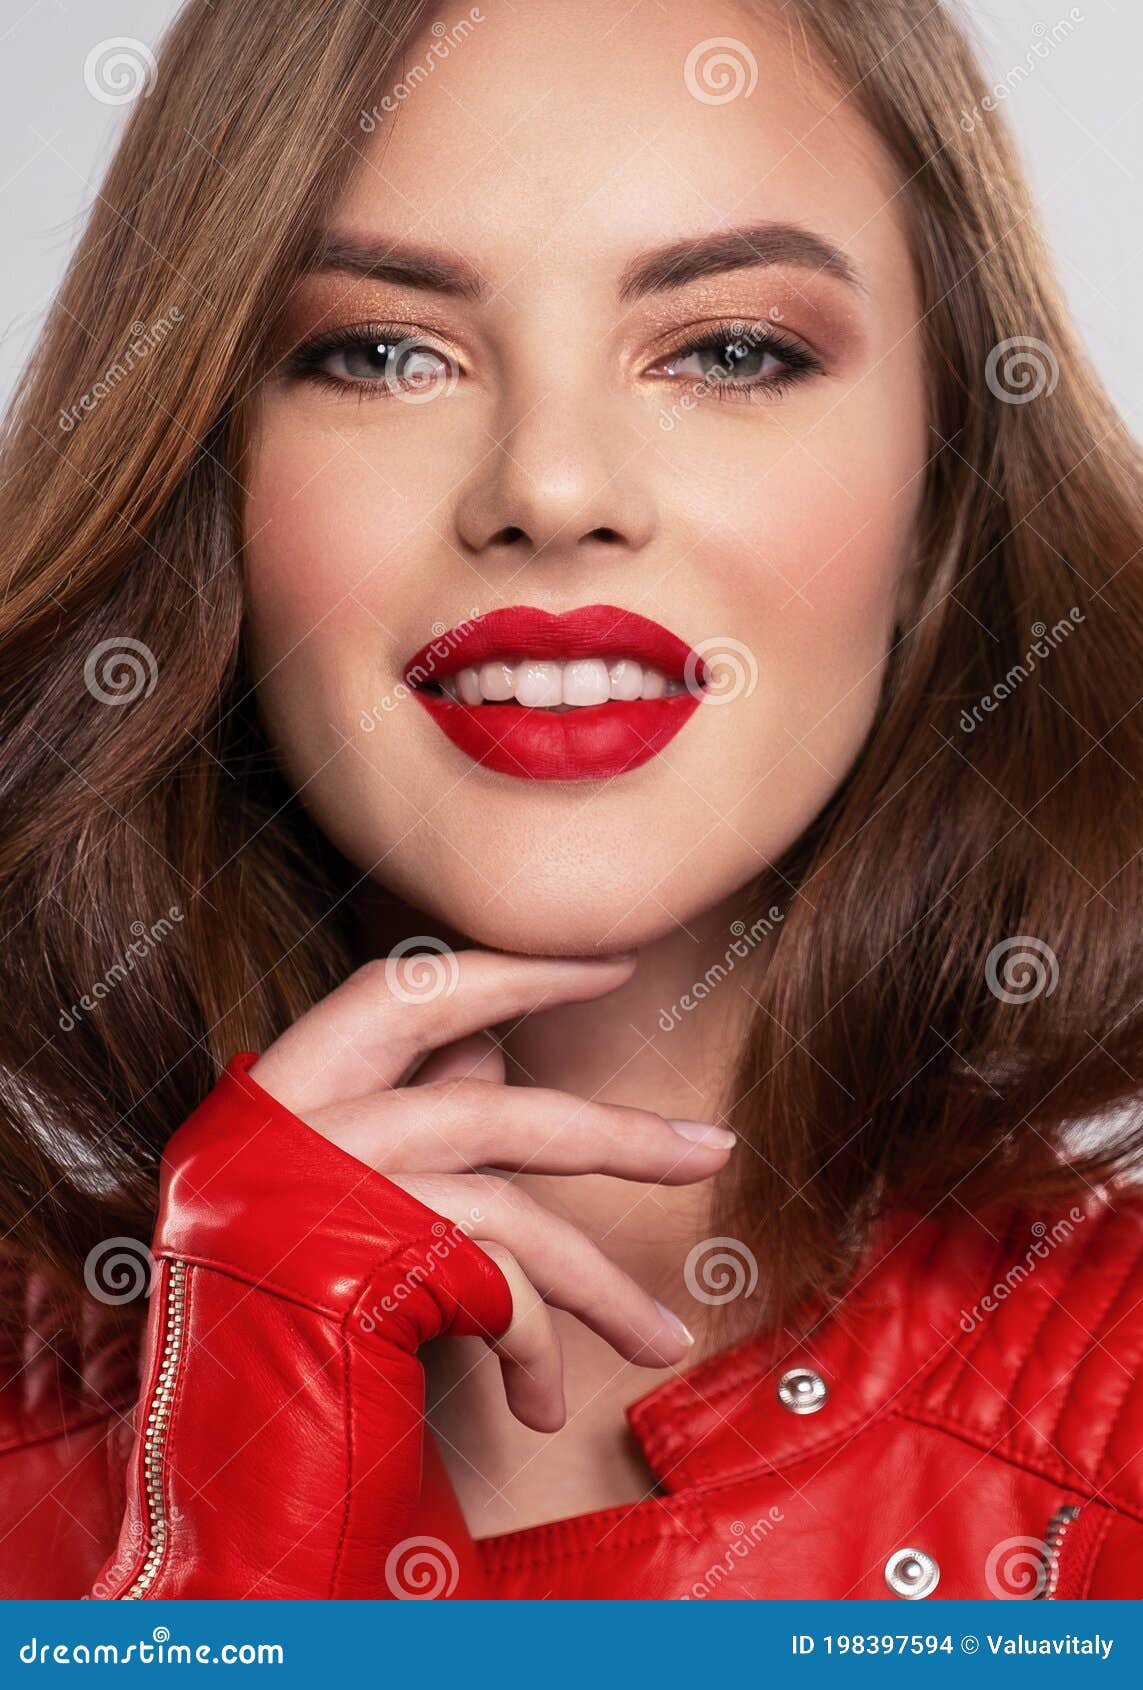 Portrait Of Smiling Young Woman With Bright Makeup Beautiful Brunette With Bright Red Lipstick